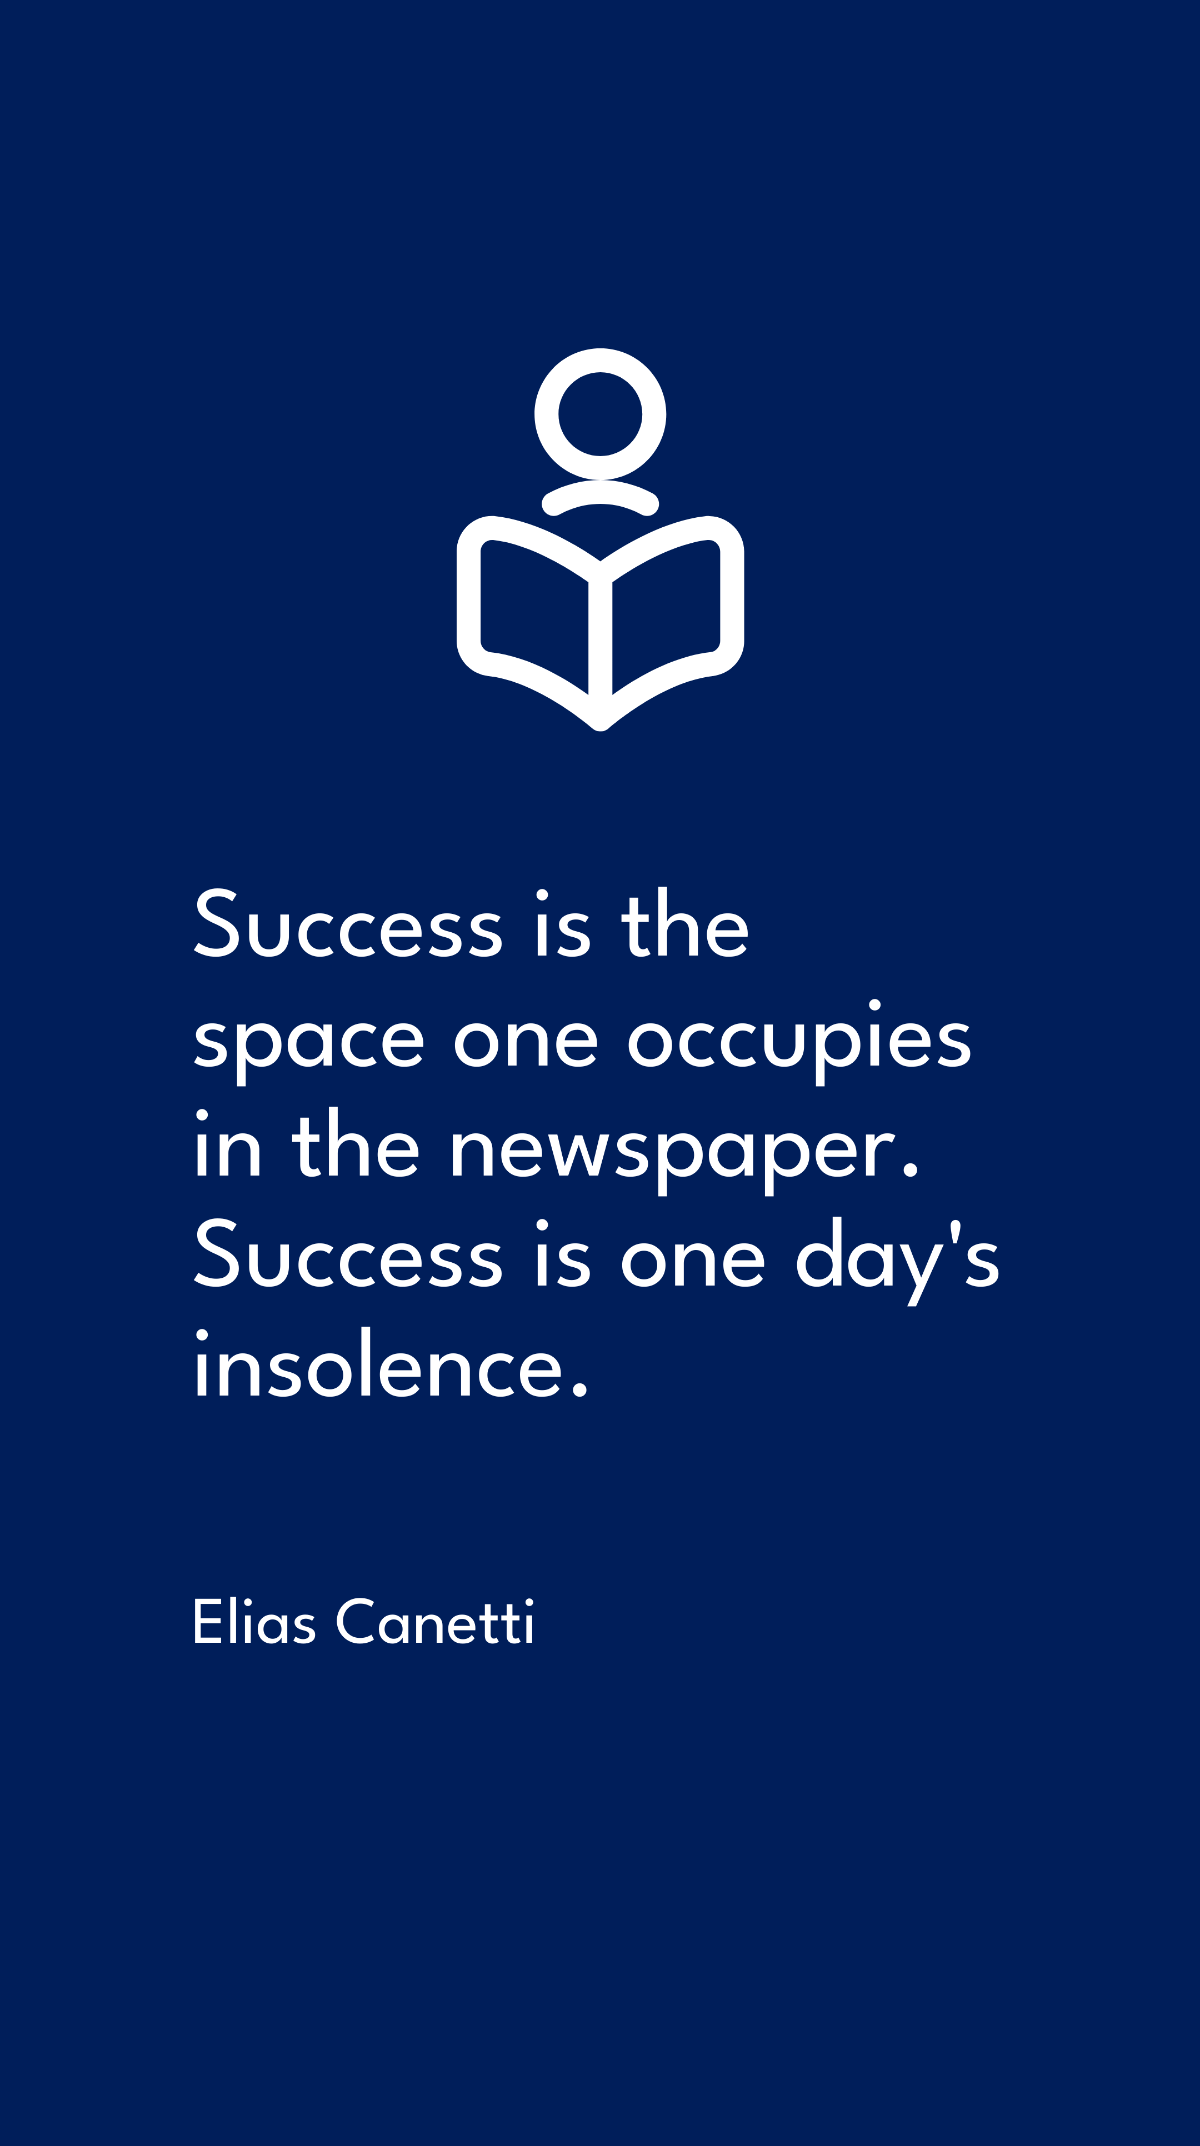 Elias Canetti - Success is the space one occupies in the newspaper. Success is one day's insolence. Template